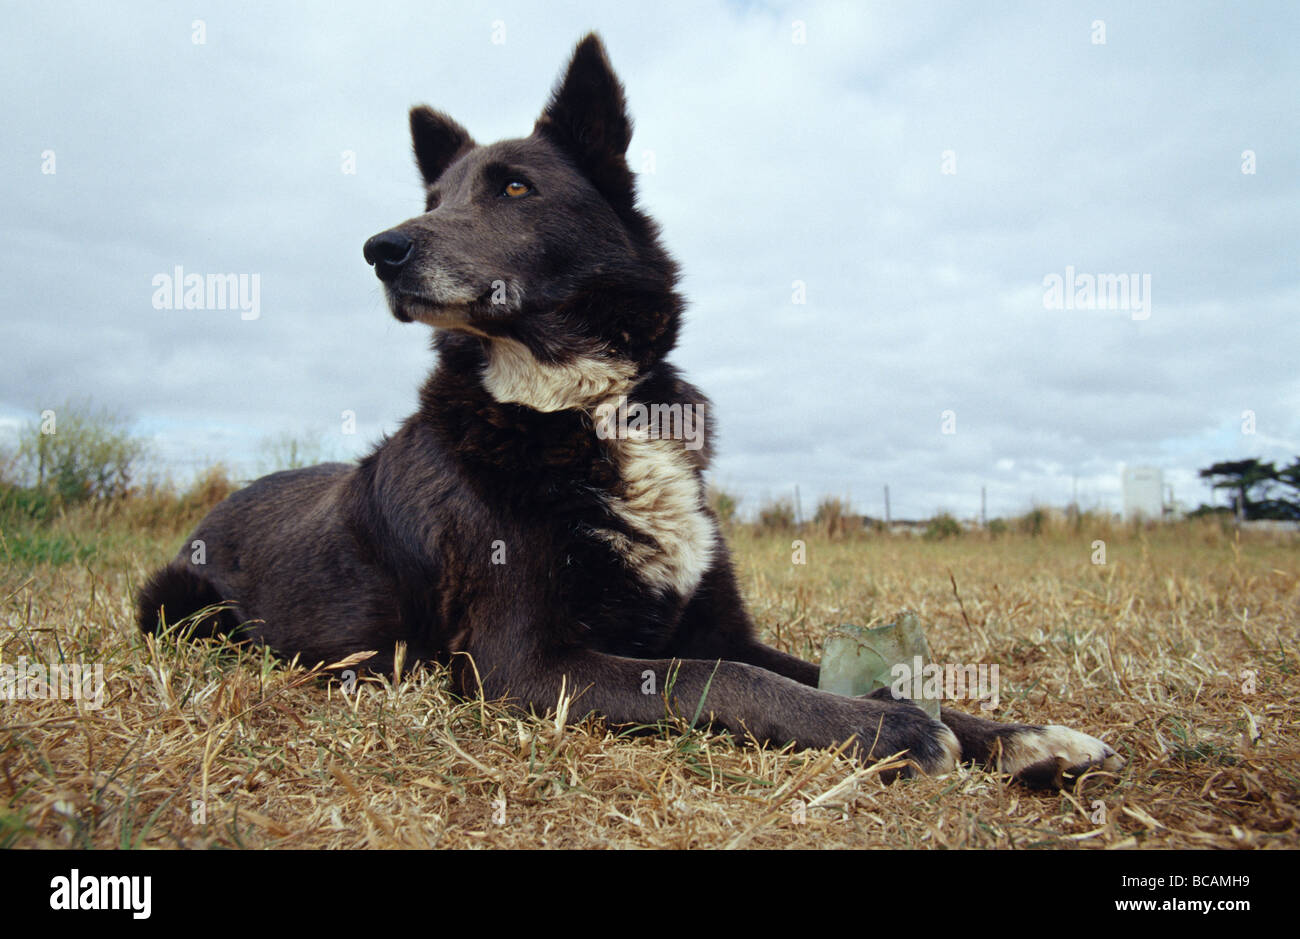 An alert Kelpie Dog resting during a game of fetch. Stock Photo